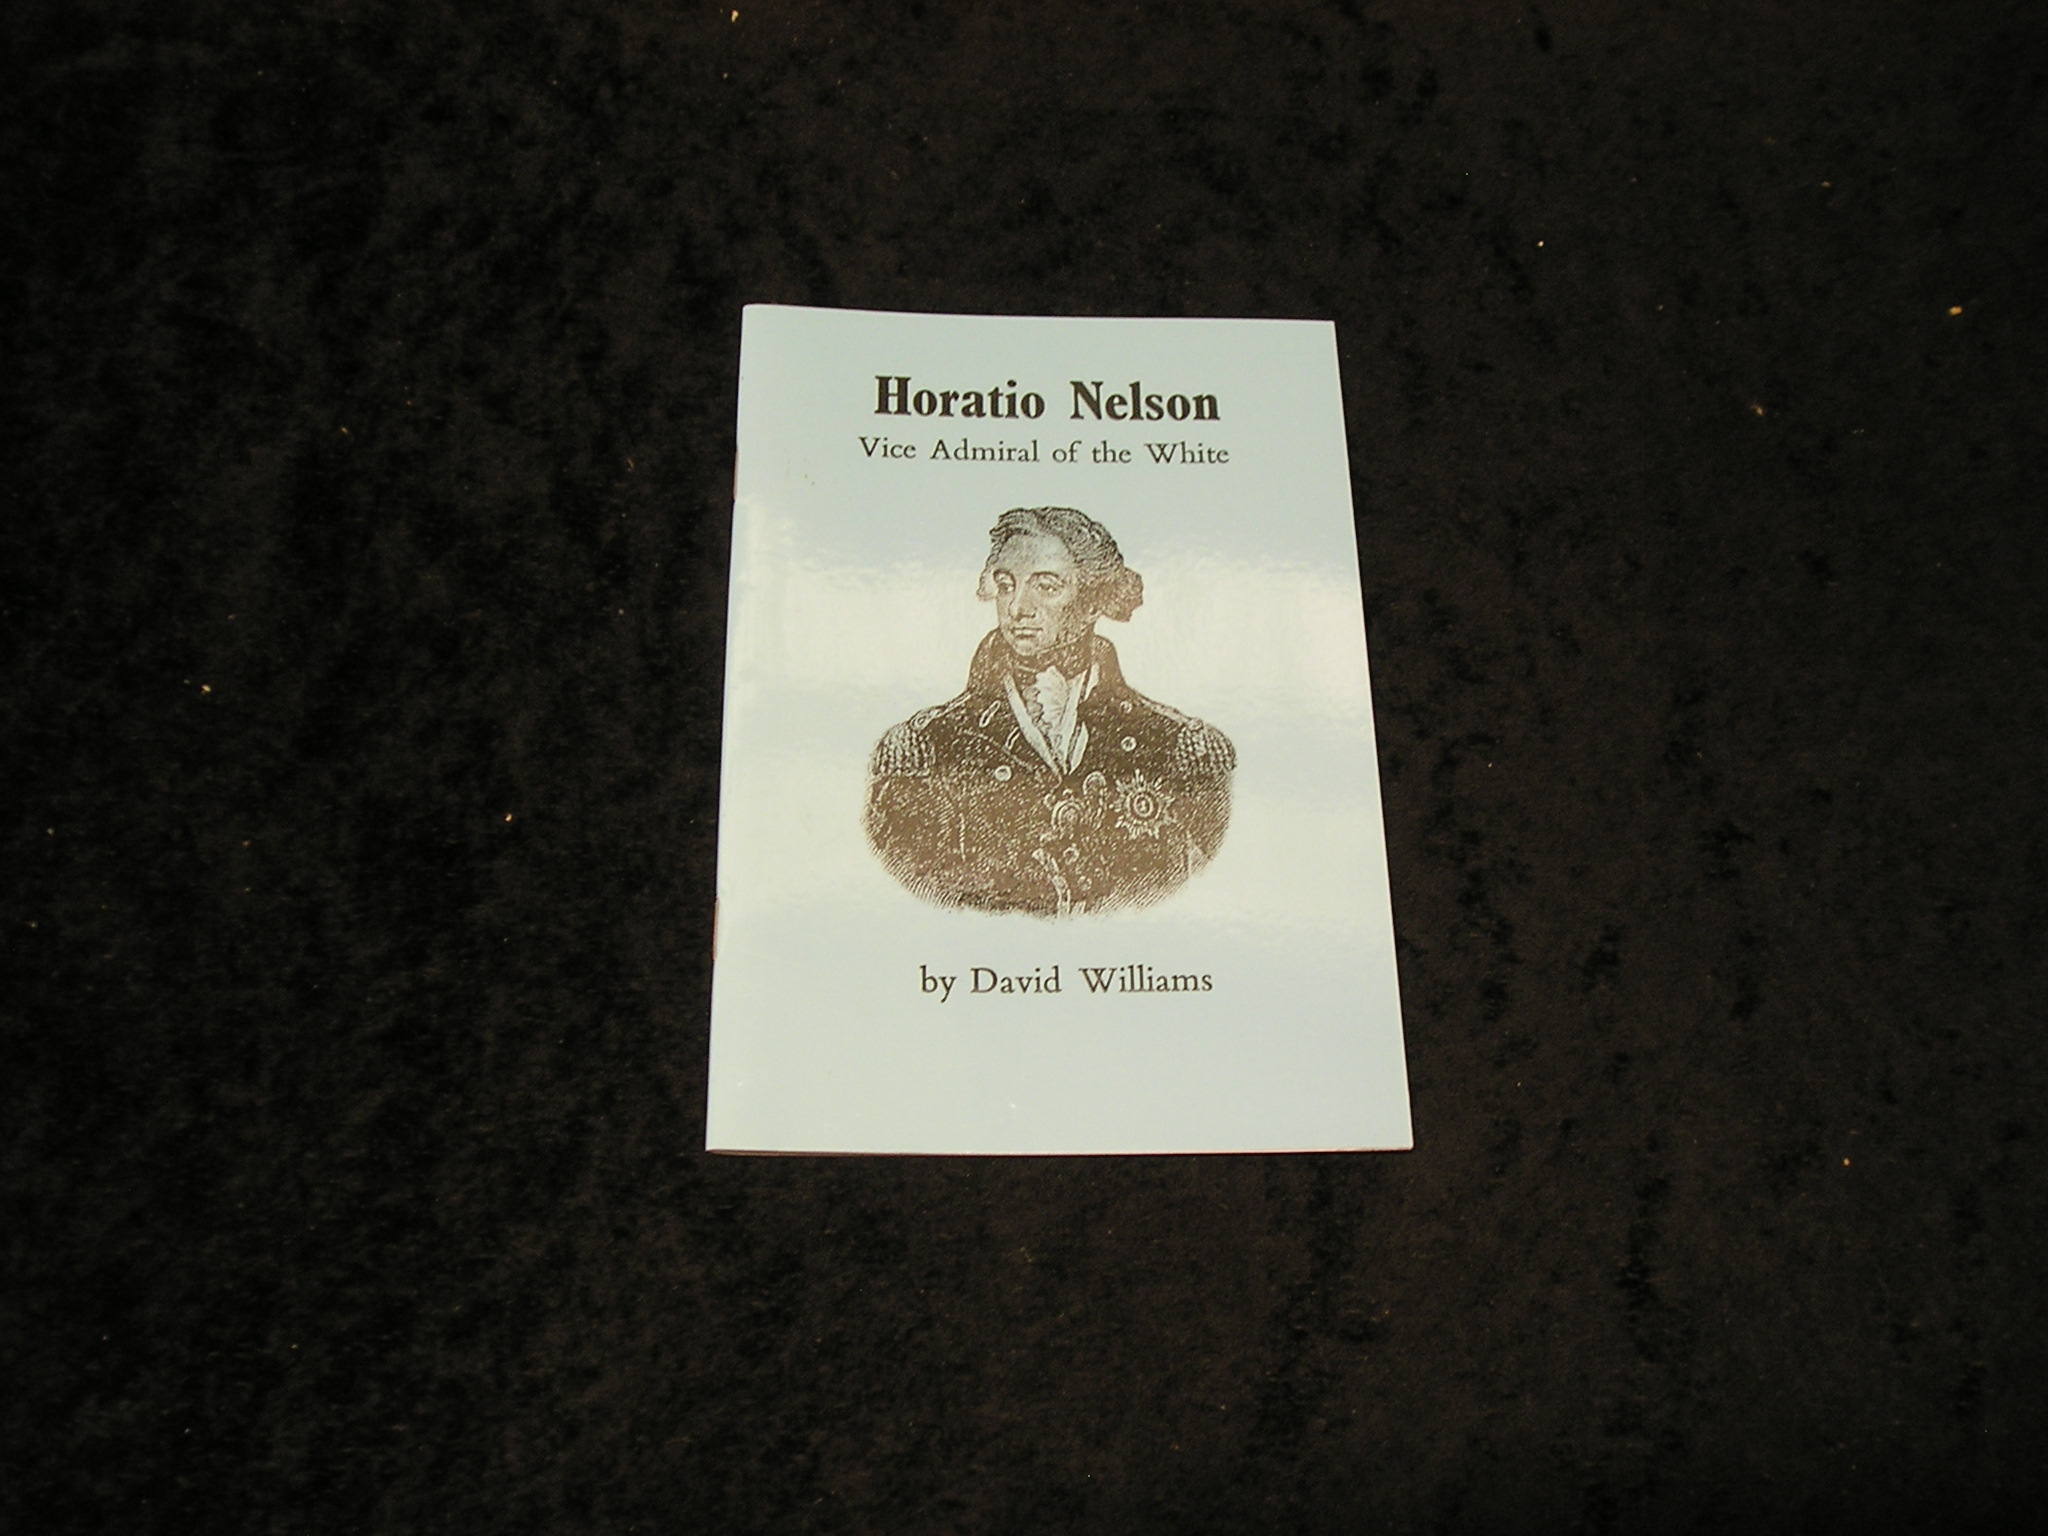 Horatio NelsonVice Admiral of the White